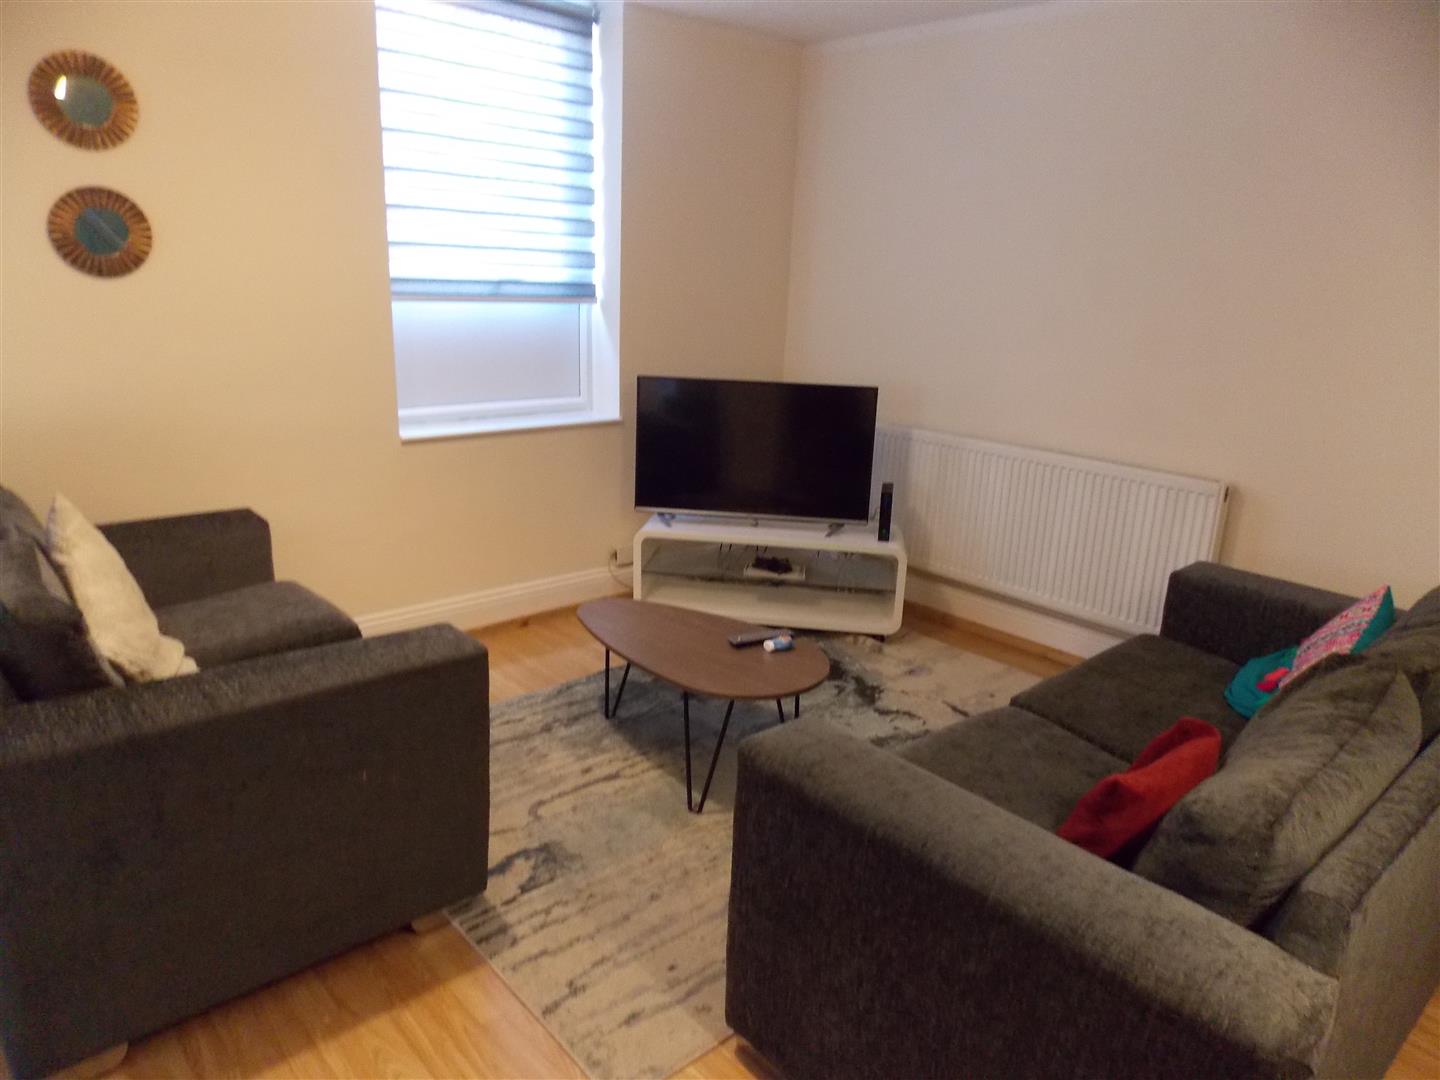 1 bed  to rent  - Property Image 6